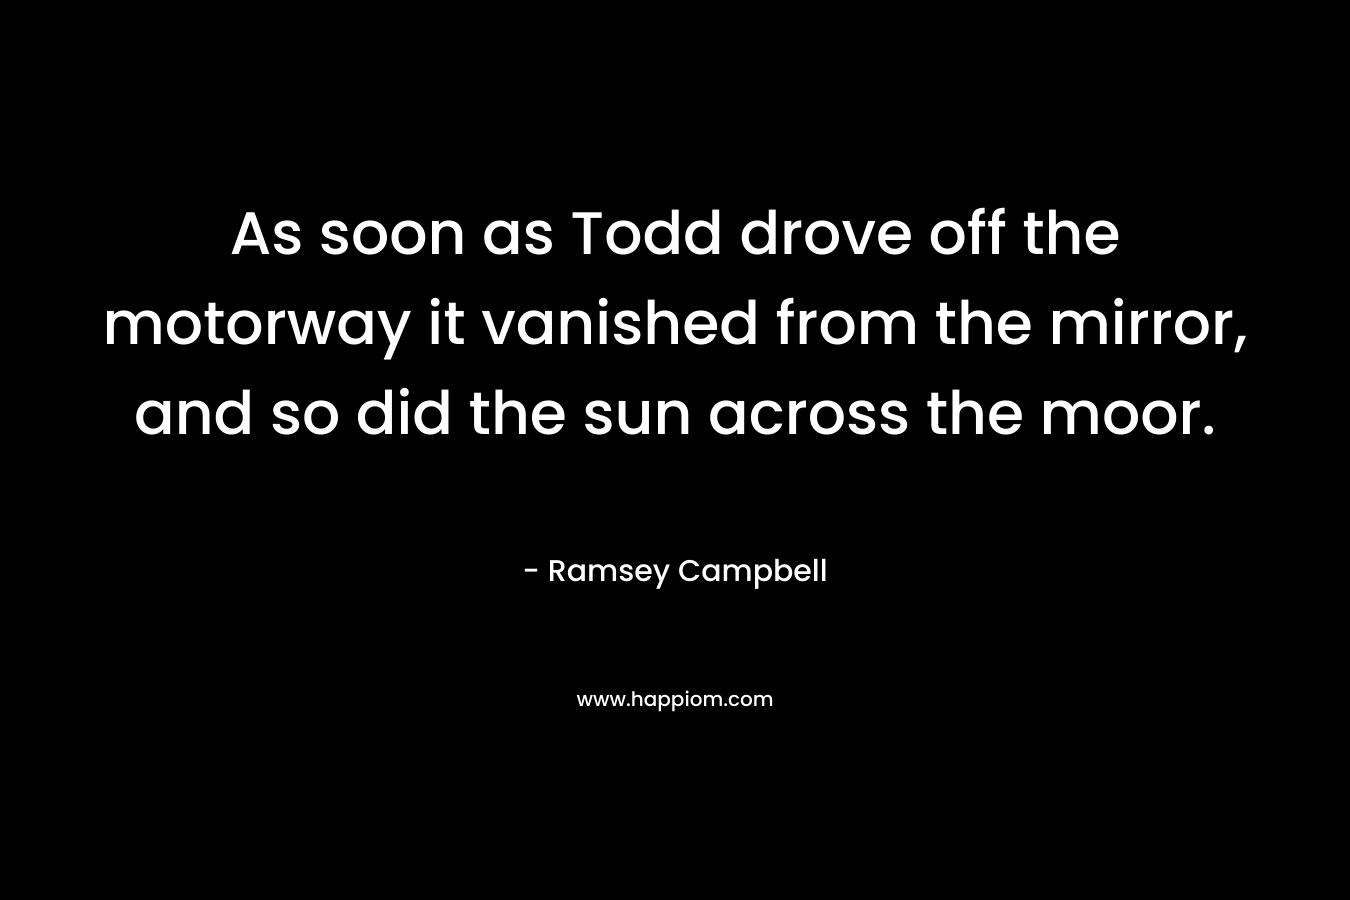 As soon as Todd drove off the motorway it vanished from the mirror, and so did the sun across the moor. – Ramsey Campbell